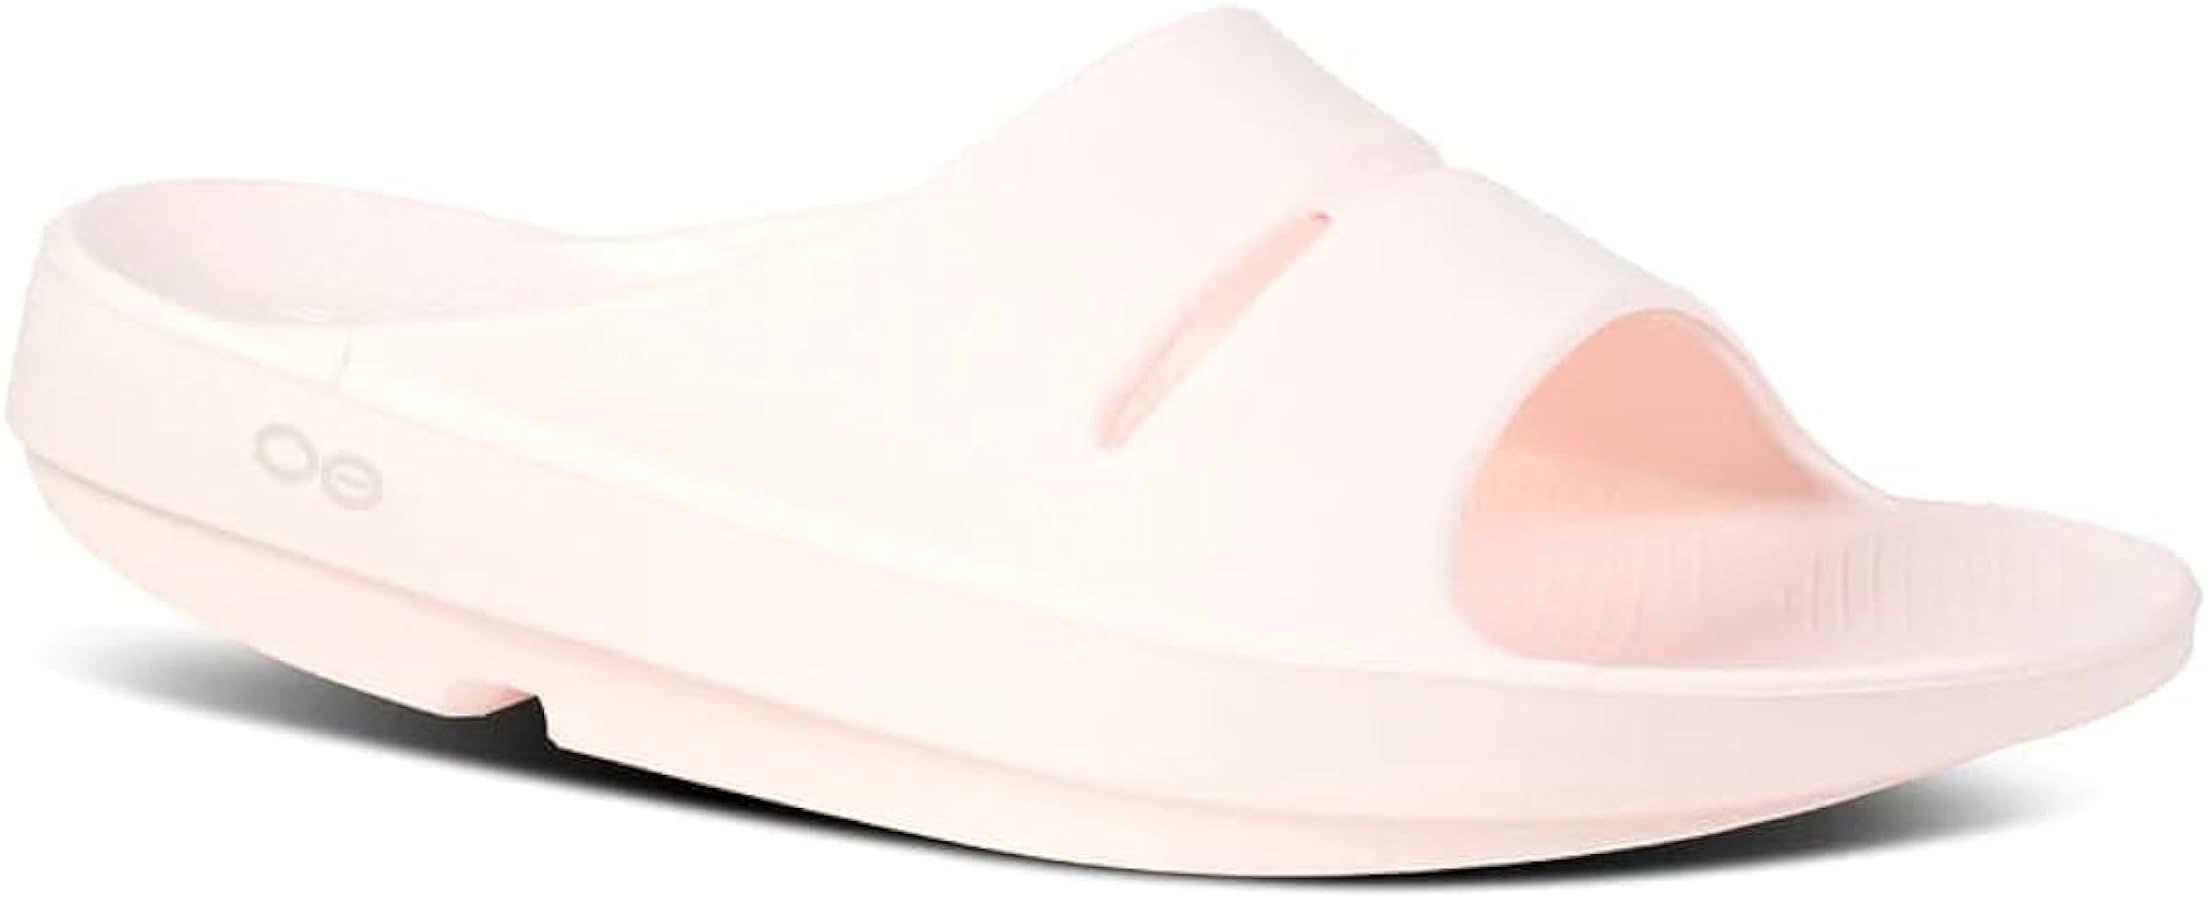 OOFOS OOahh Slide - Lightweight Recovery Footwear - Reduces Stress on Feet, Joints & Back - Machi... | Amazon (US)